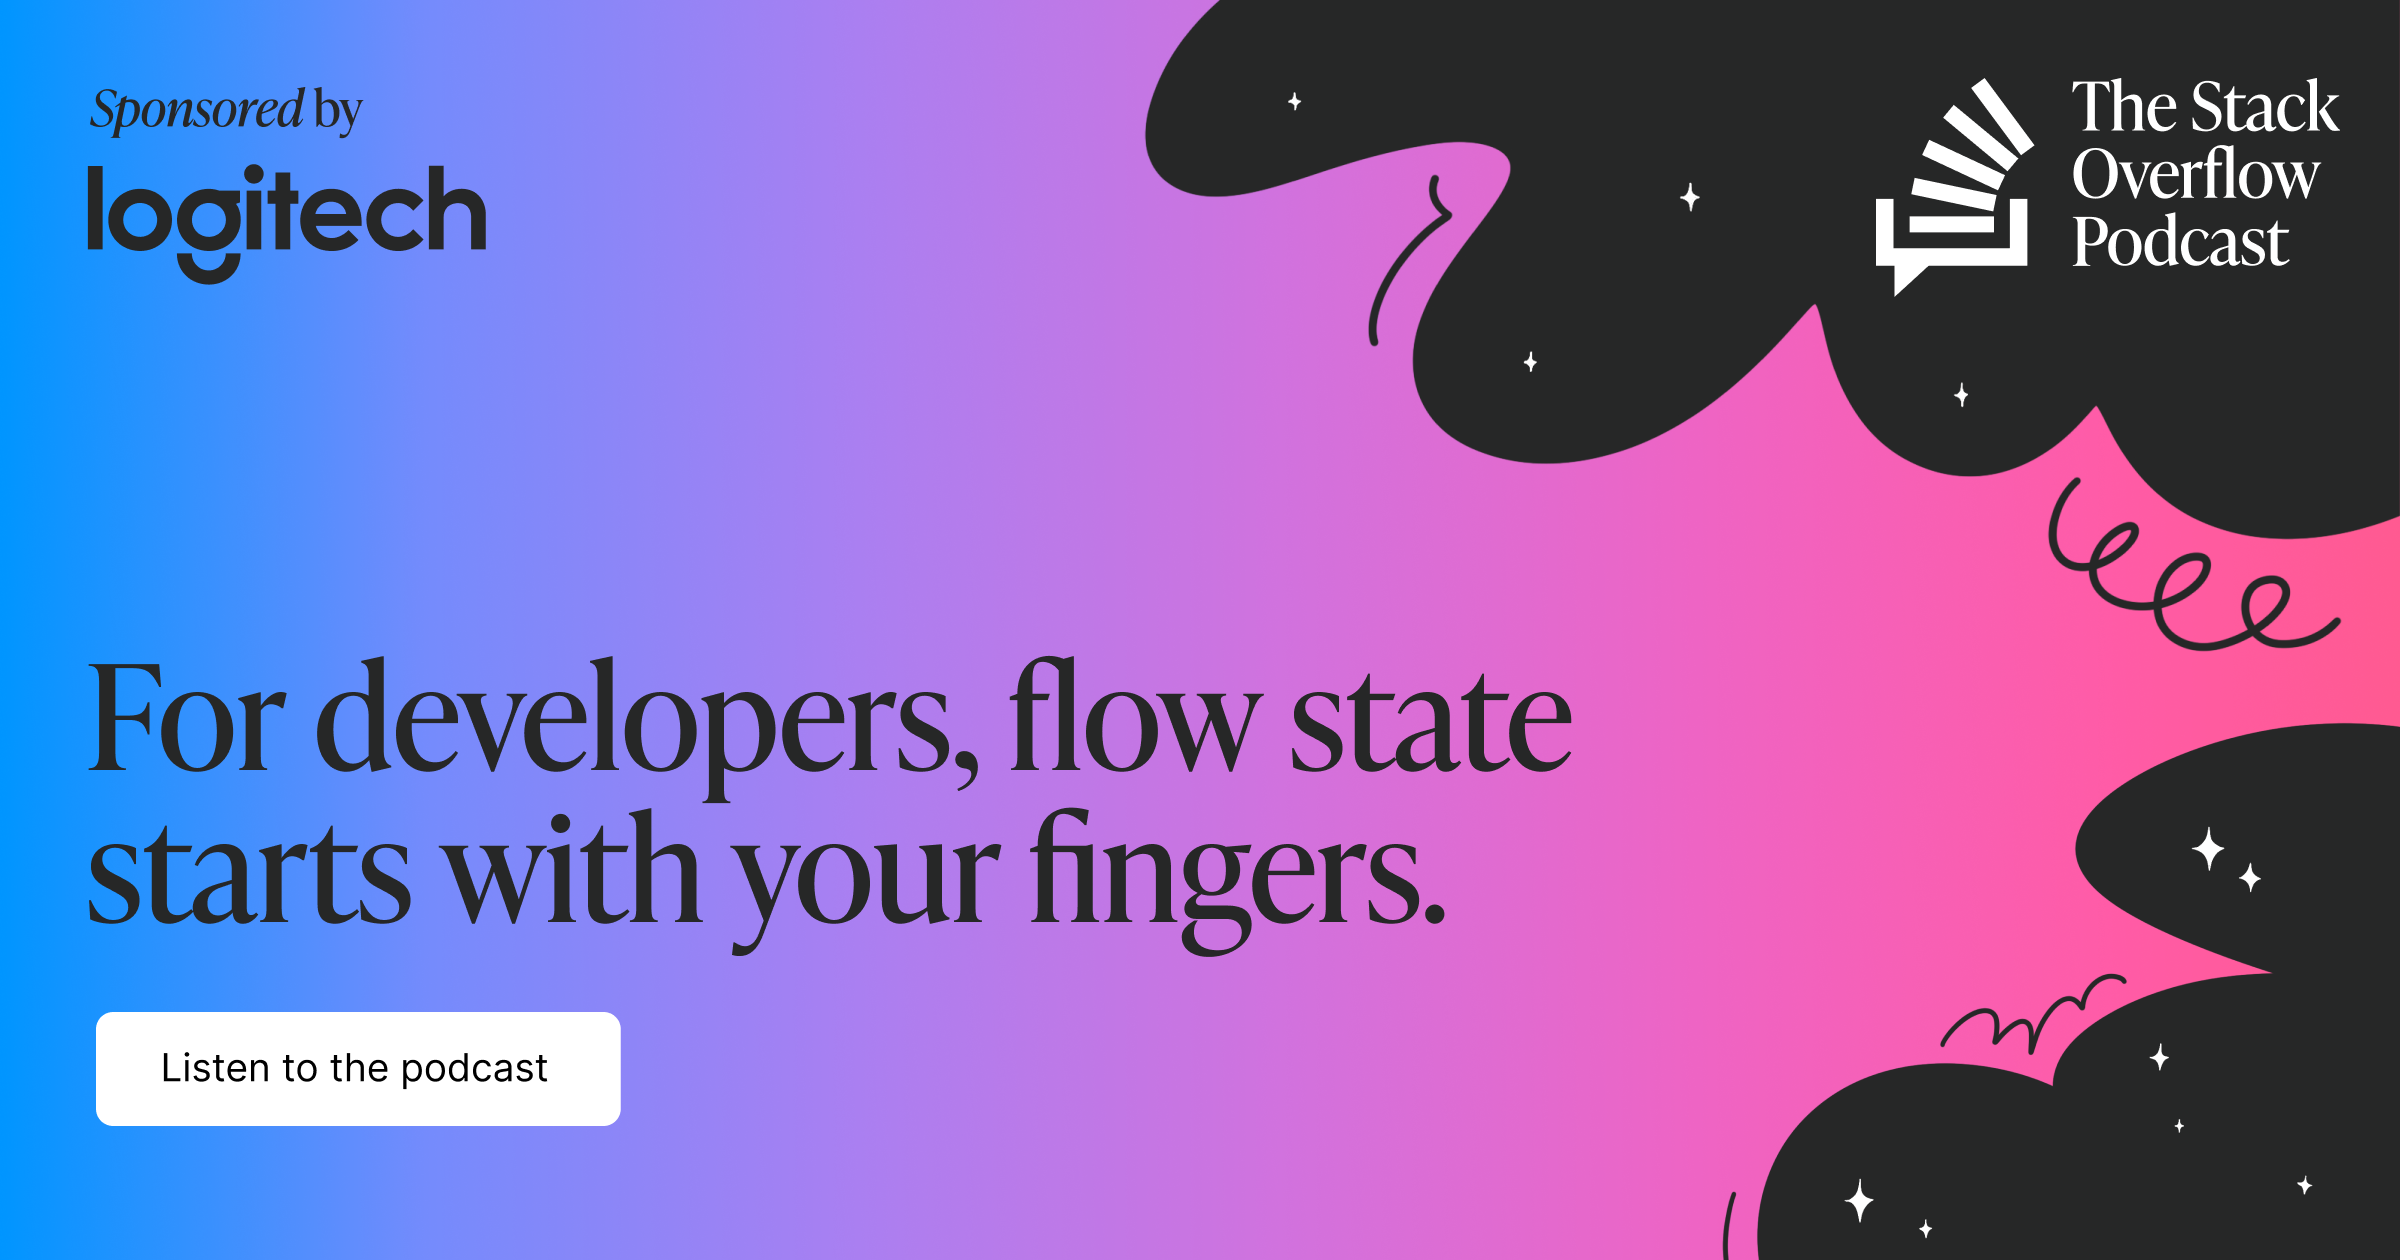 How To Achieve Your “Flow State”. Flow State also known as being